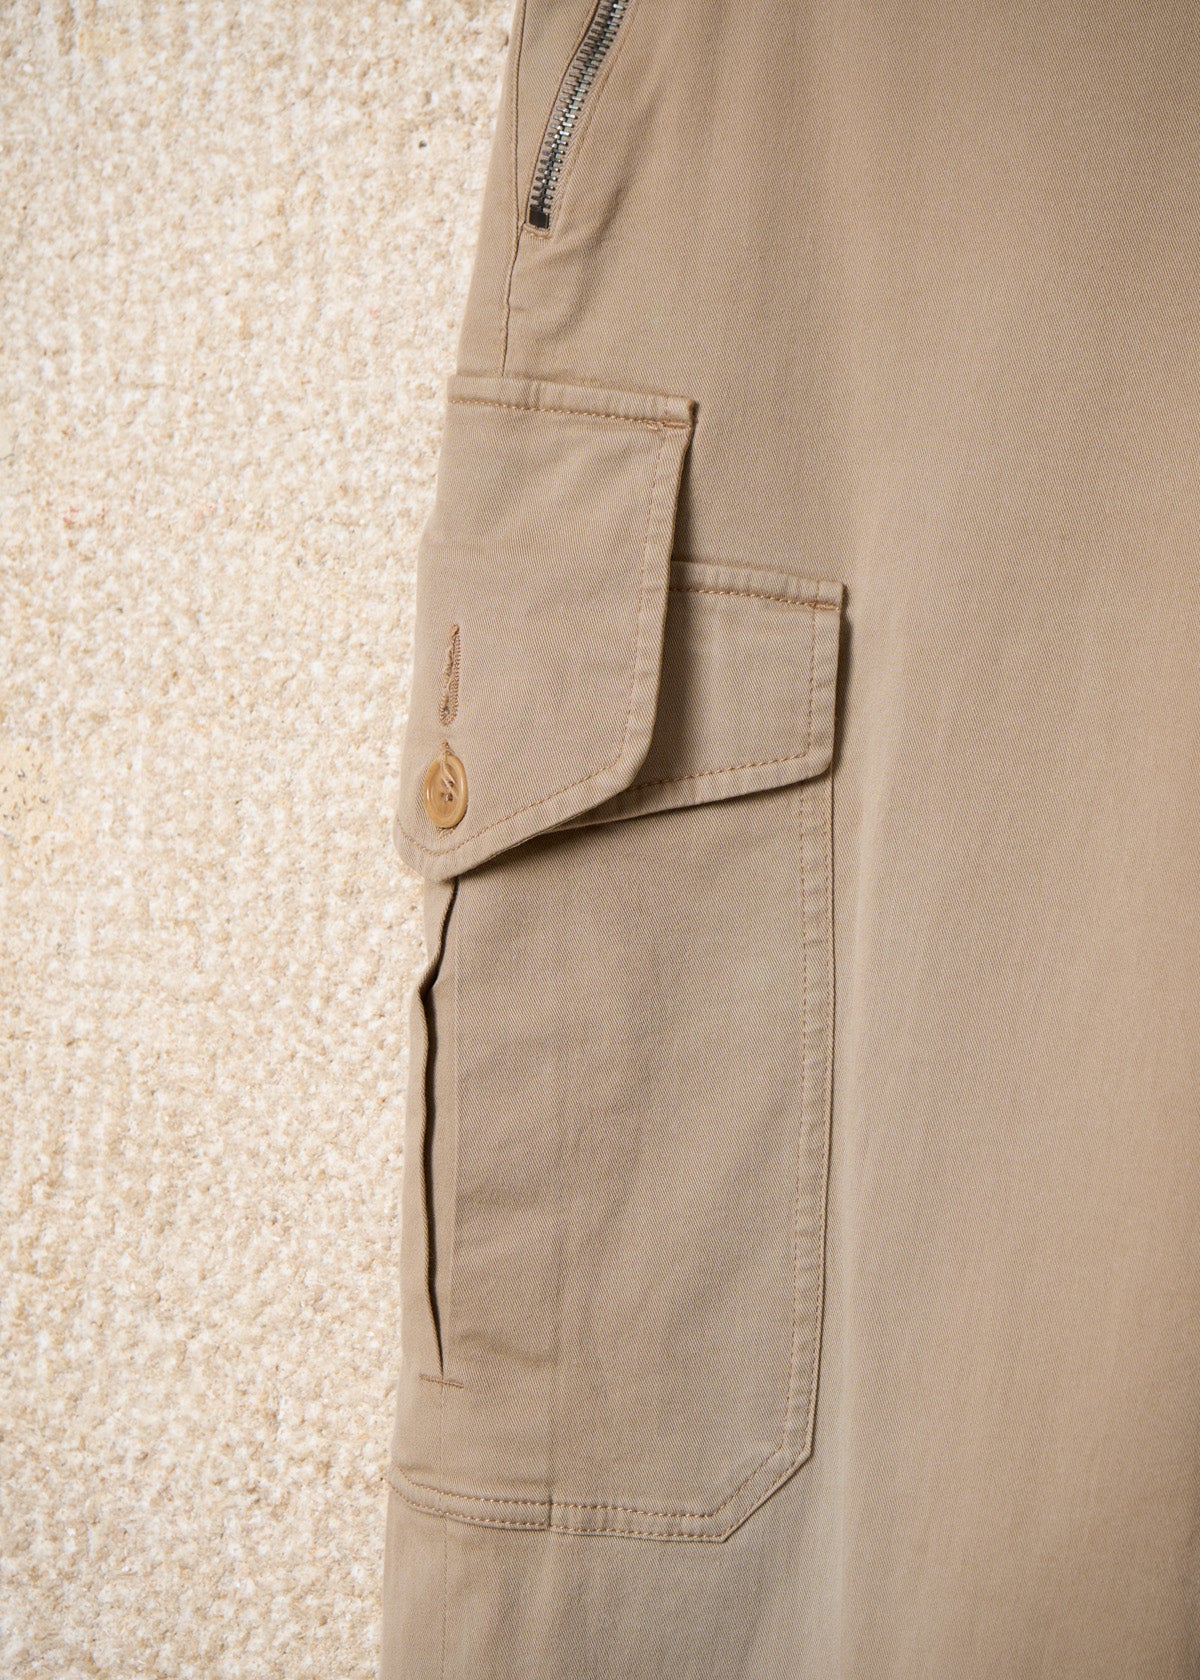 One Side Pocket Cotton Cargo Pants 2000's - Small